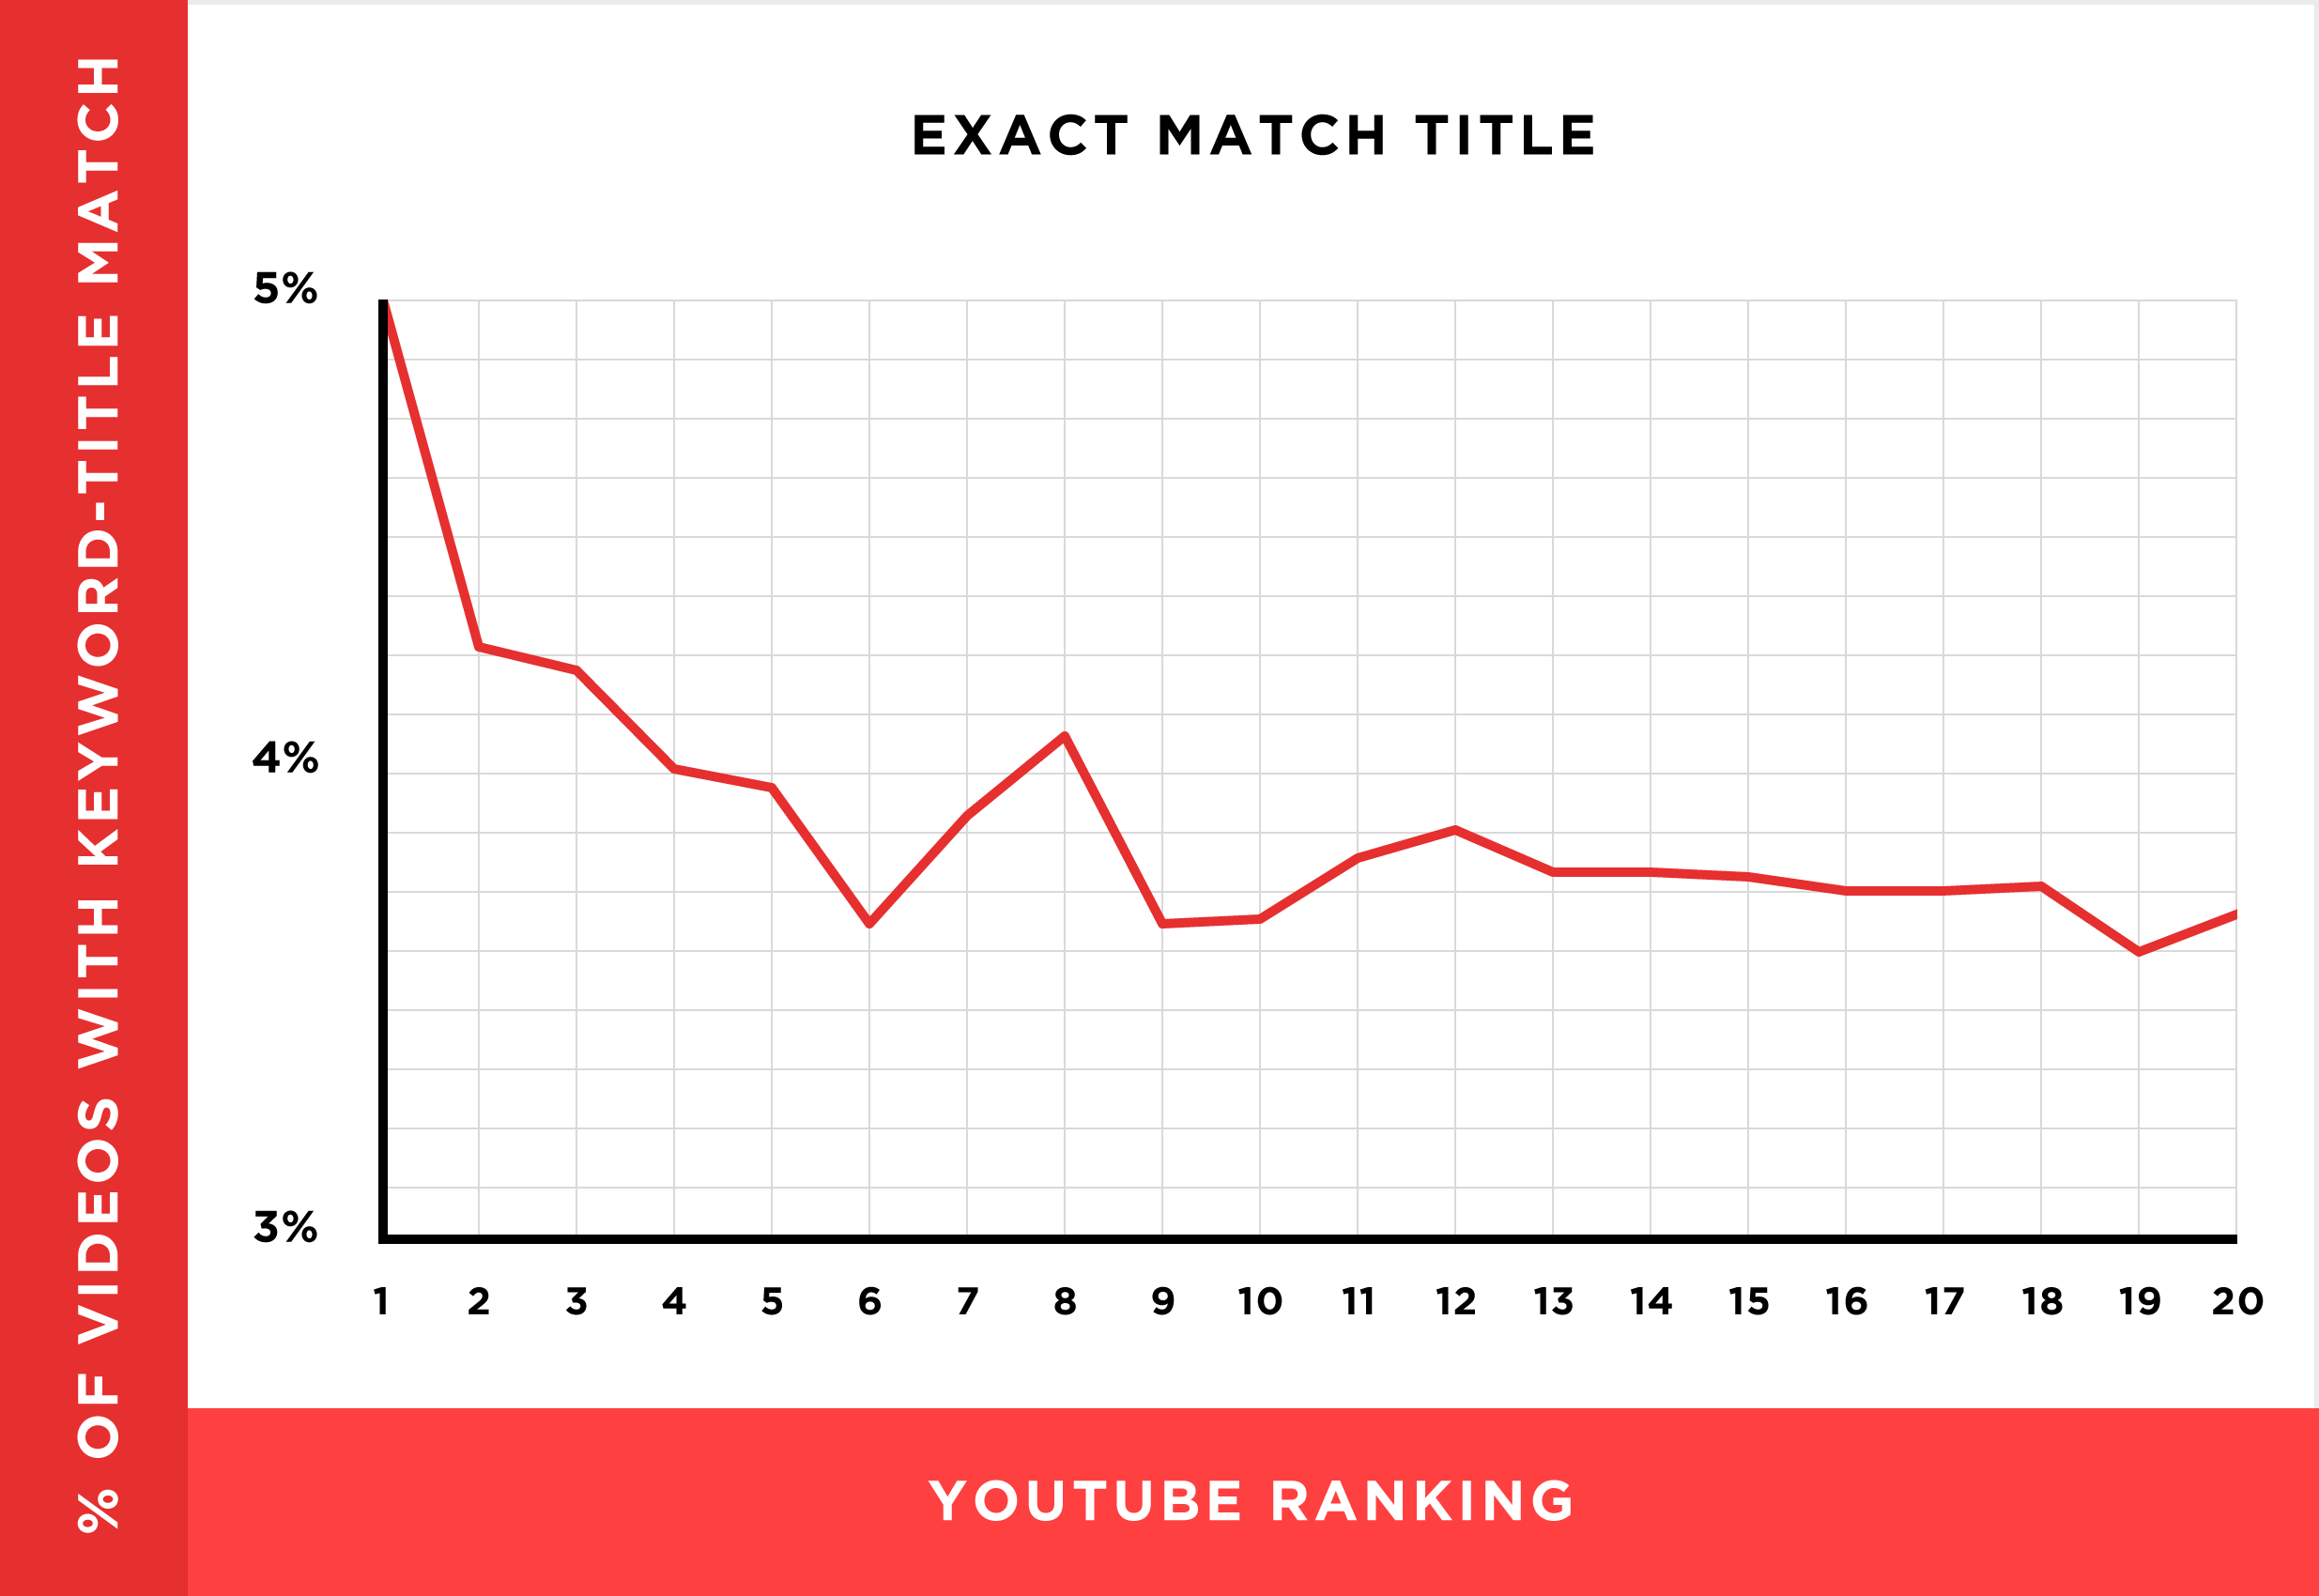 the relationships between YouTube ranking and keywords